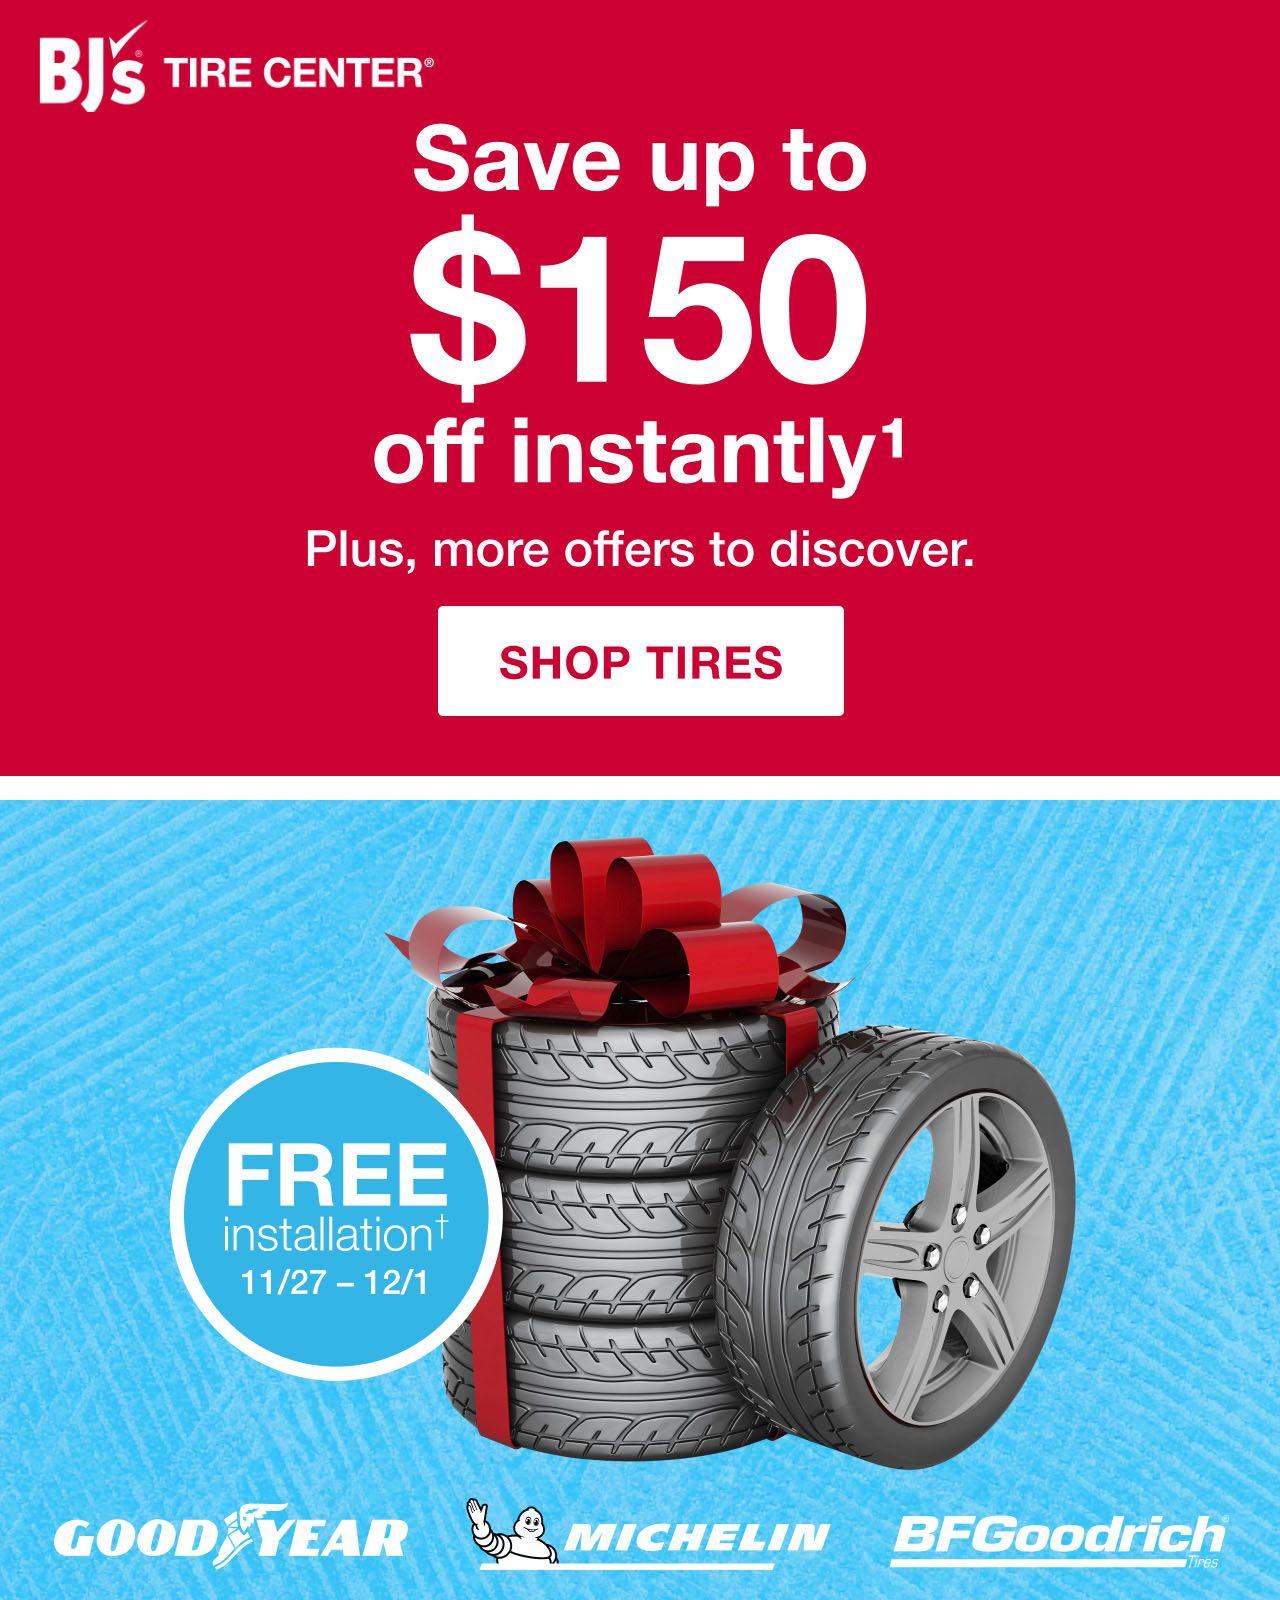 BJs Tire Center. Goodyear. Michelin. BFGoodrich. Free installation† 11/27 - 12/01. Save up to $150 off inSave up to $150 instantly plus fast installation, free rotation and flat repairs. Click here to shop tires.tantly1. Plus, more offers to discover. Click here to shop tires